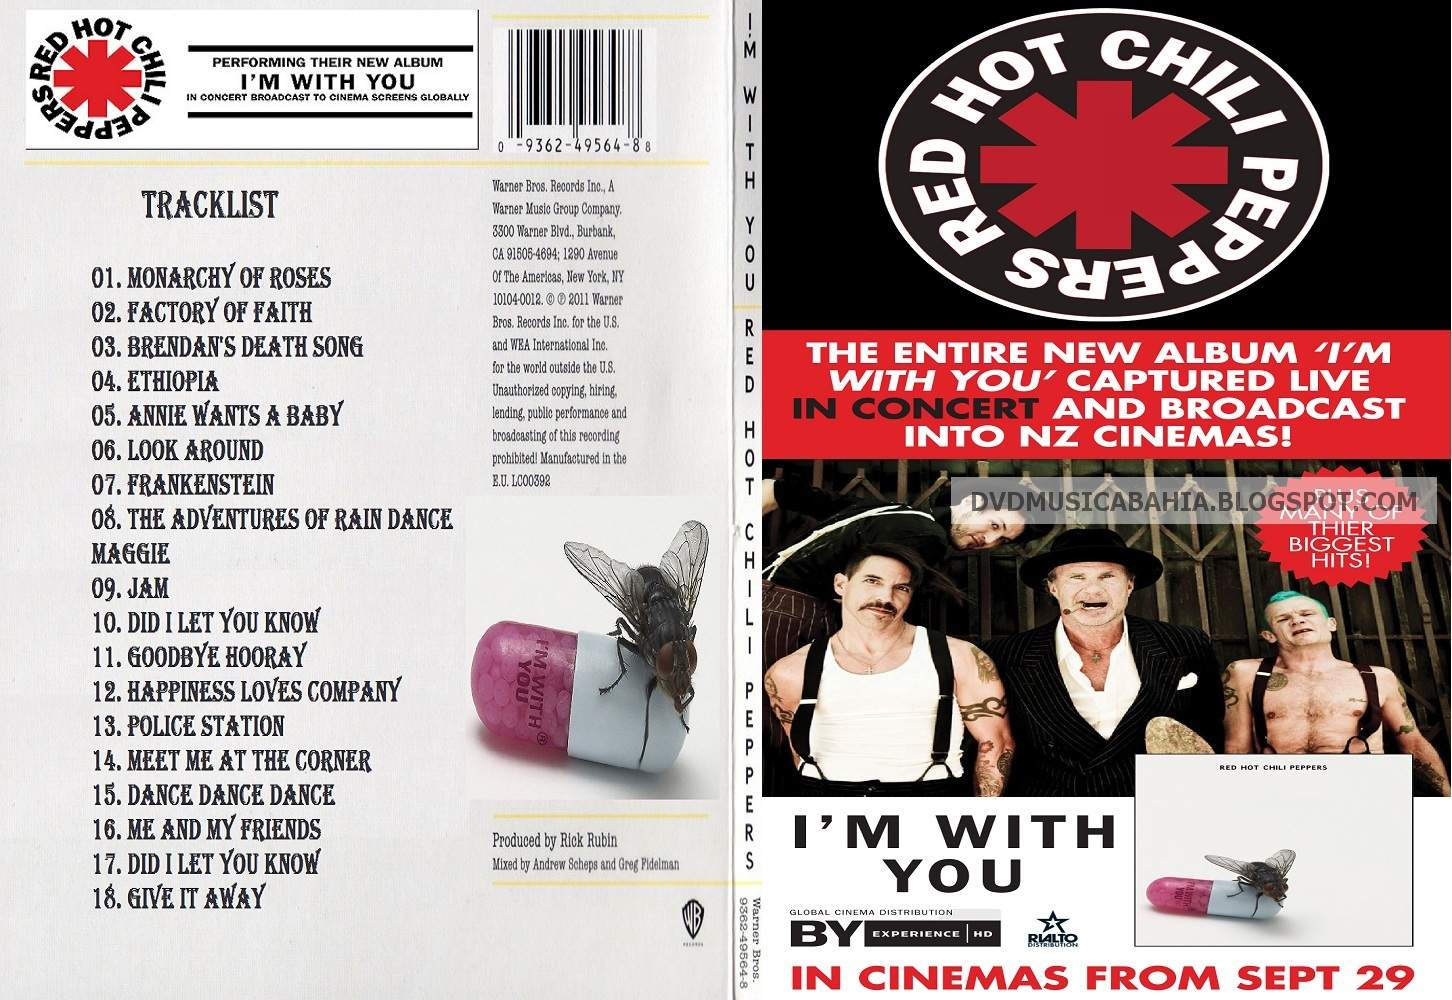 Перевод песни red pepper. Monarchy of Roses RHCP. Red hot Chili Peppers im with you. Red hot Chili Peppers - around the World Ноты. The alternative Polka текст Red hot Chili Peppers.